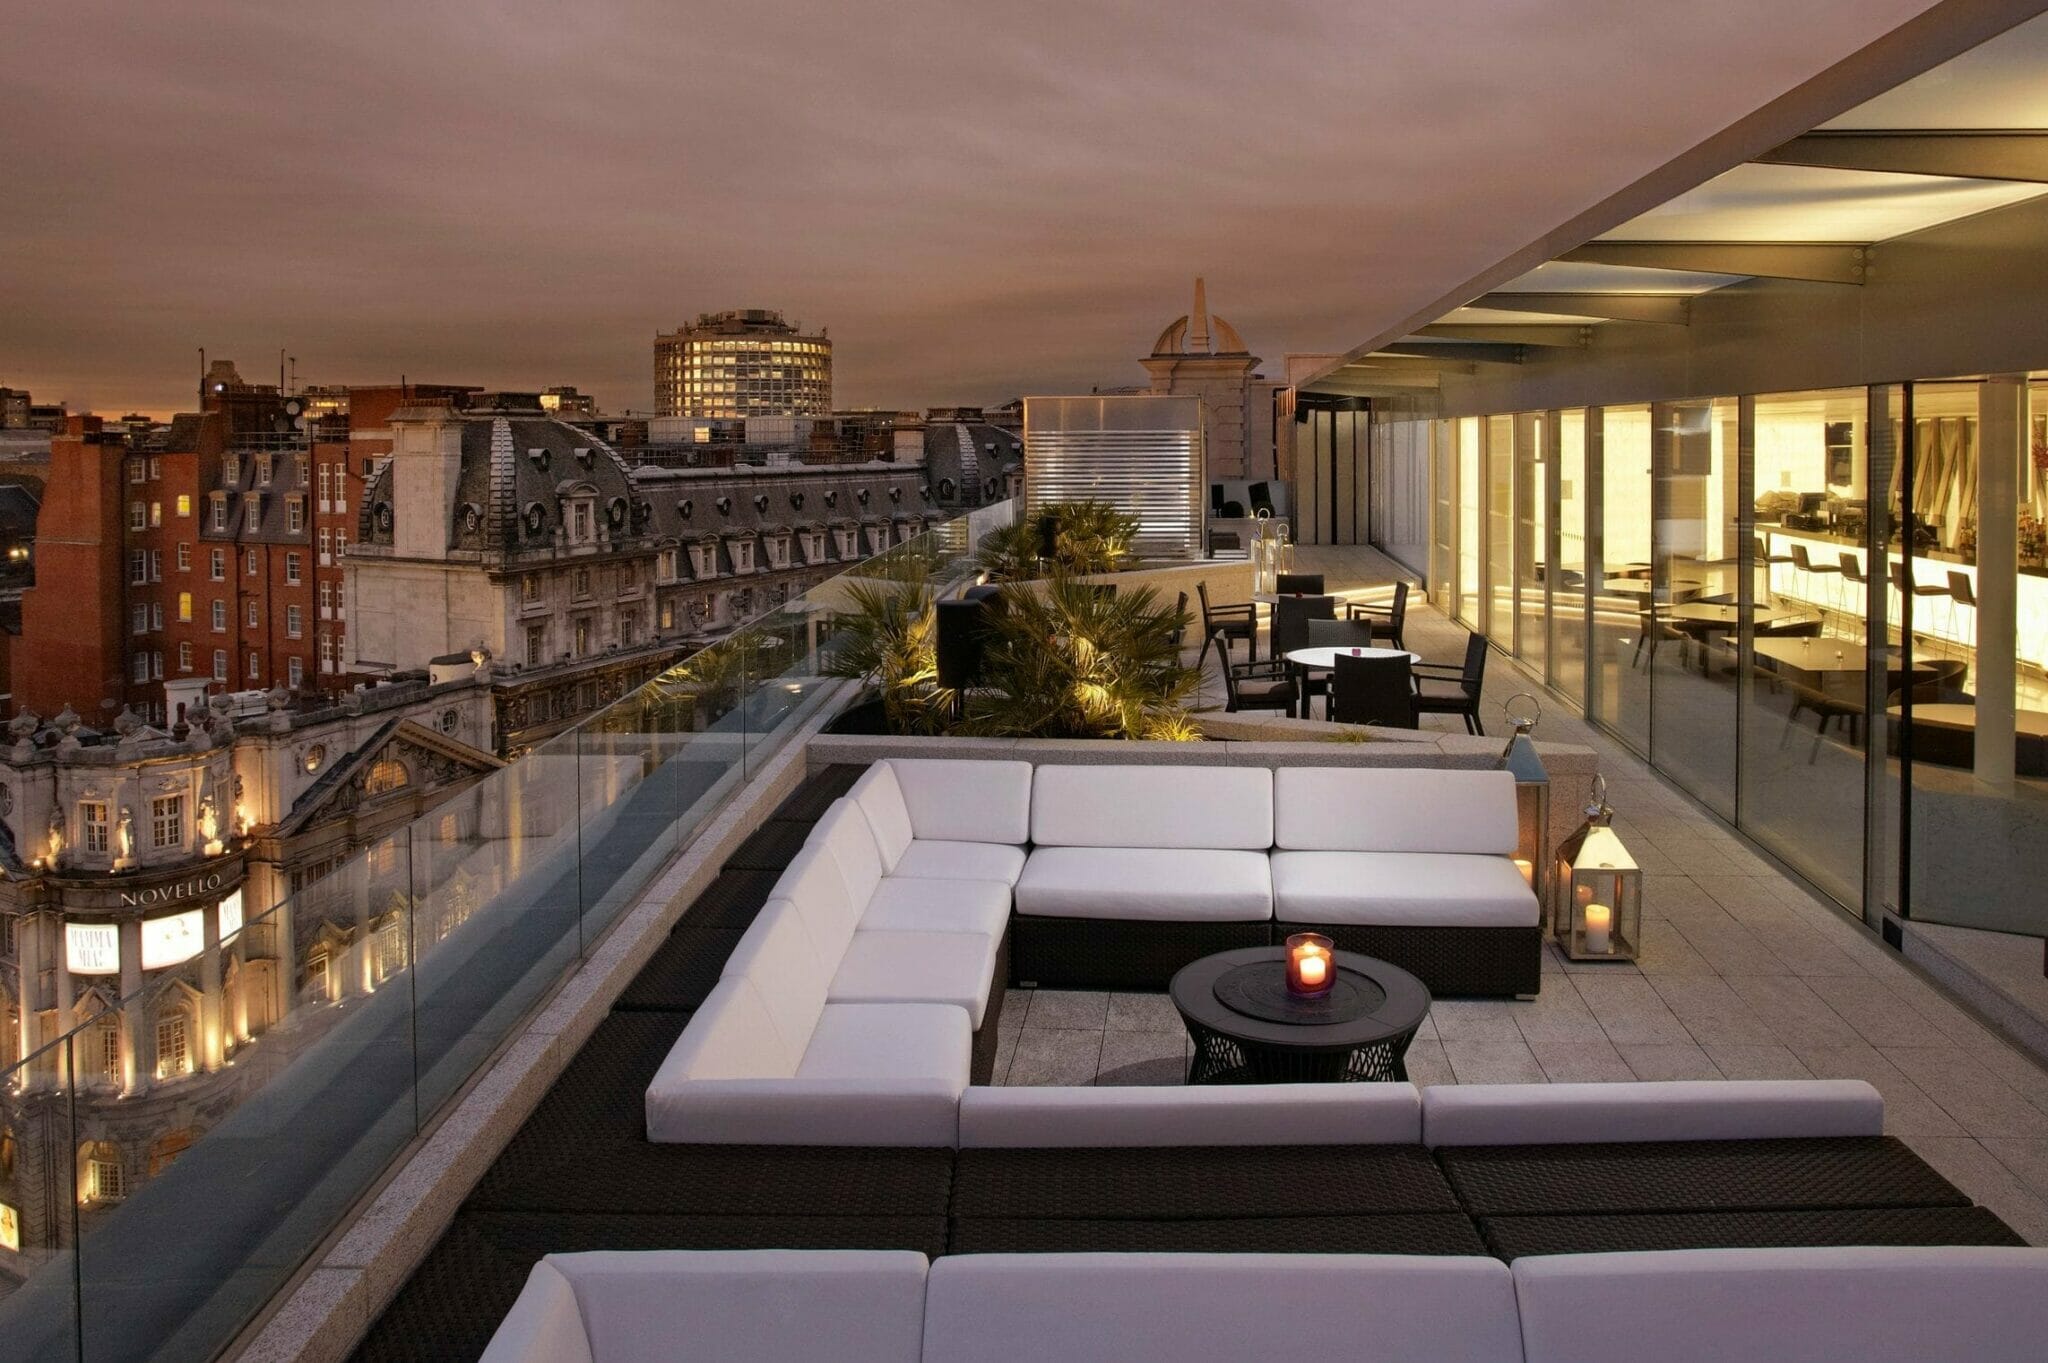 The Best Rooftop Bars In London You're Going Up In The World